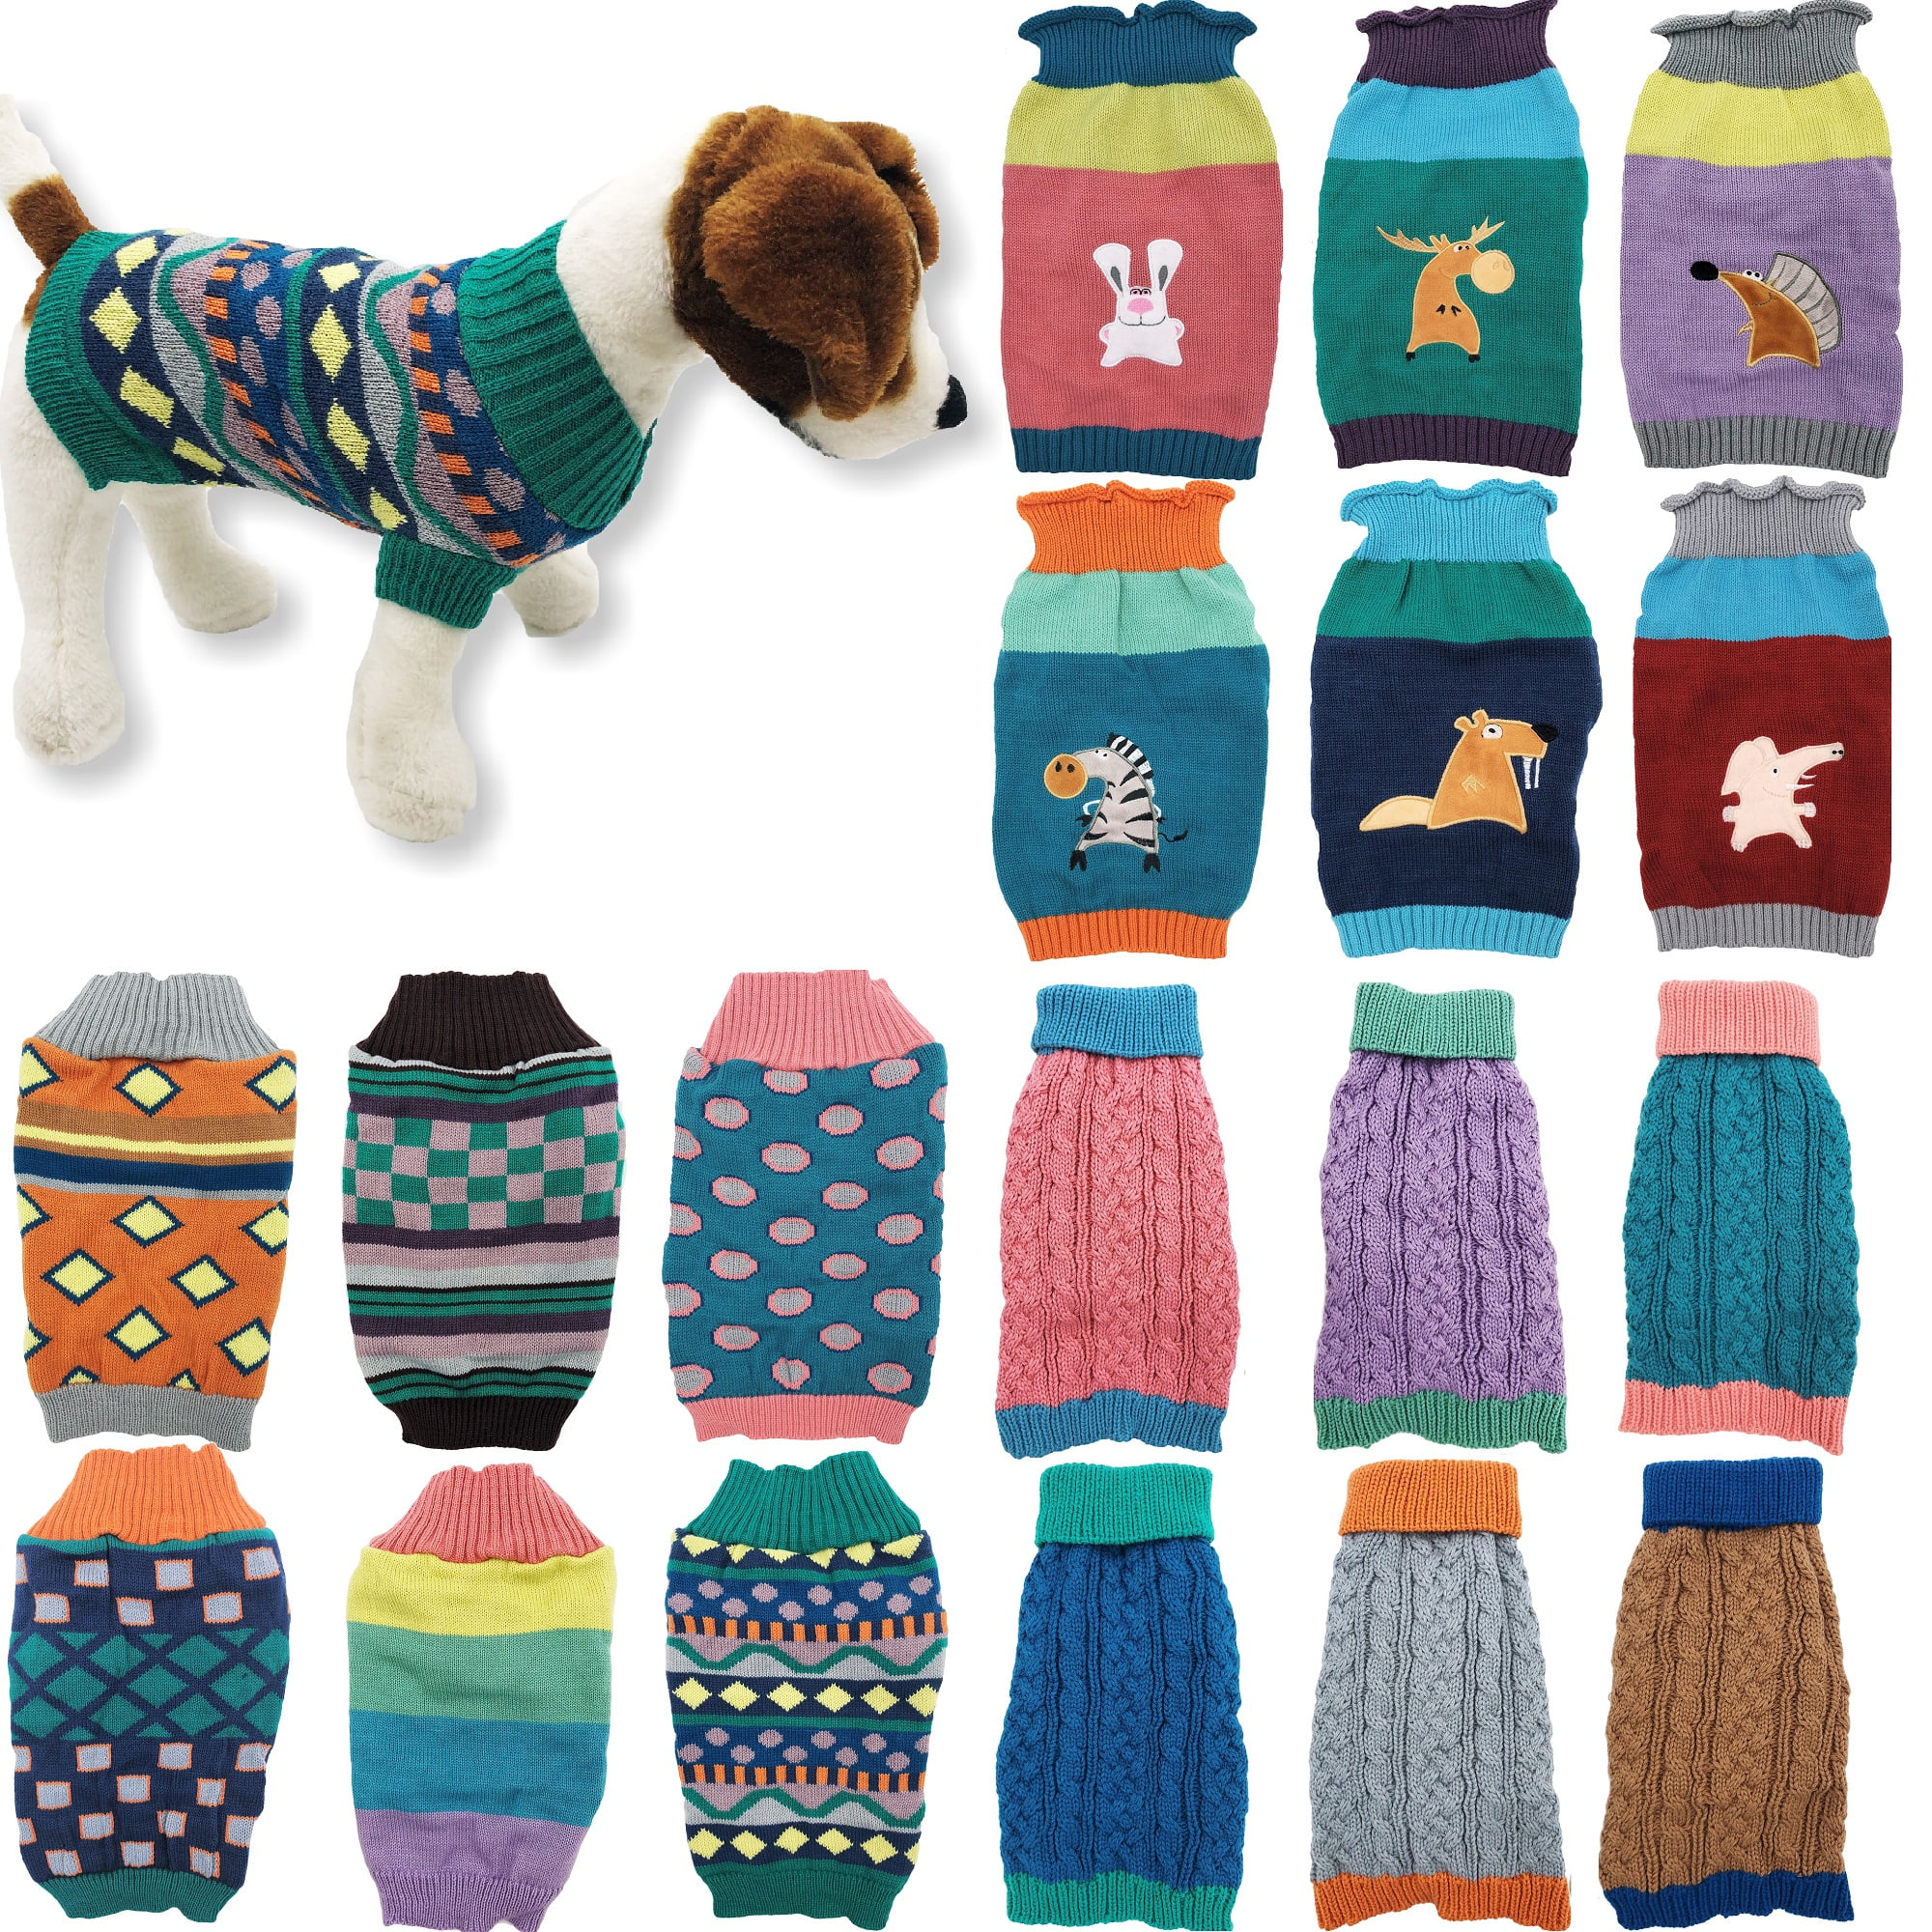 Petyoung Dog Sweater Vest Warm Coat Pet Soft Knitting Winter Sweaters Warm Knitwear Clothes for Small Dogs